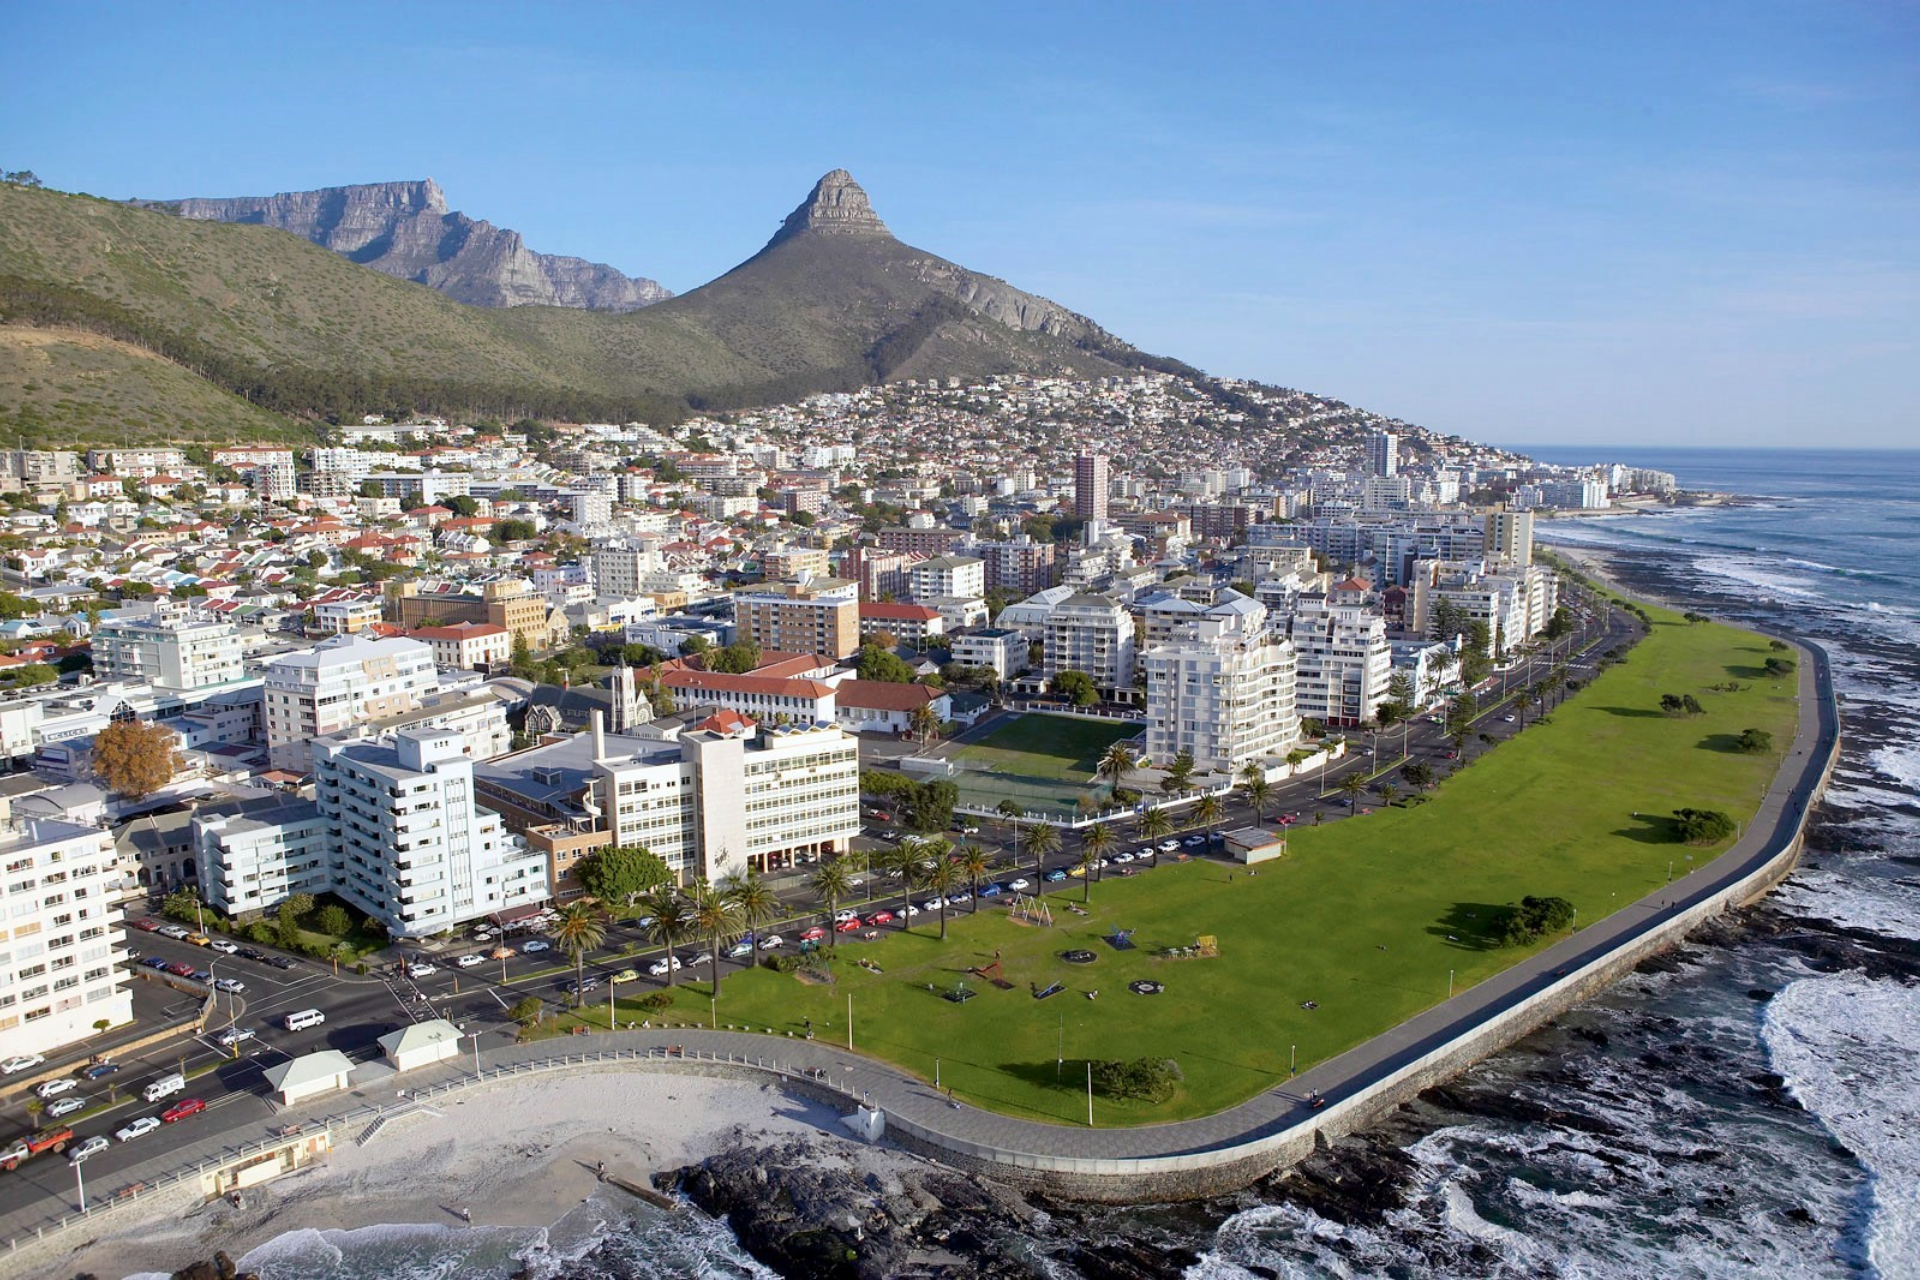 Cape Town ranked one of the safest cities in South Africa